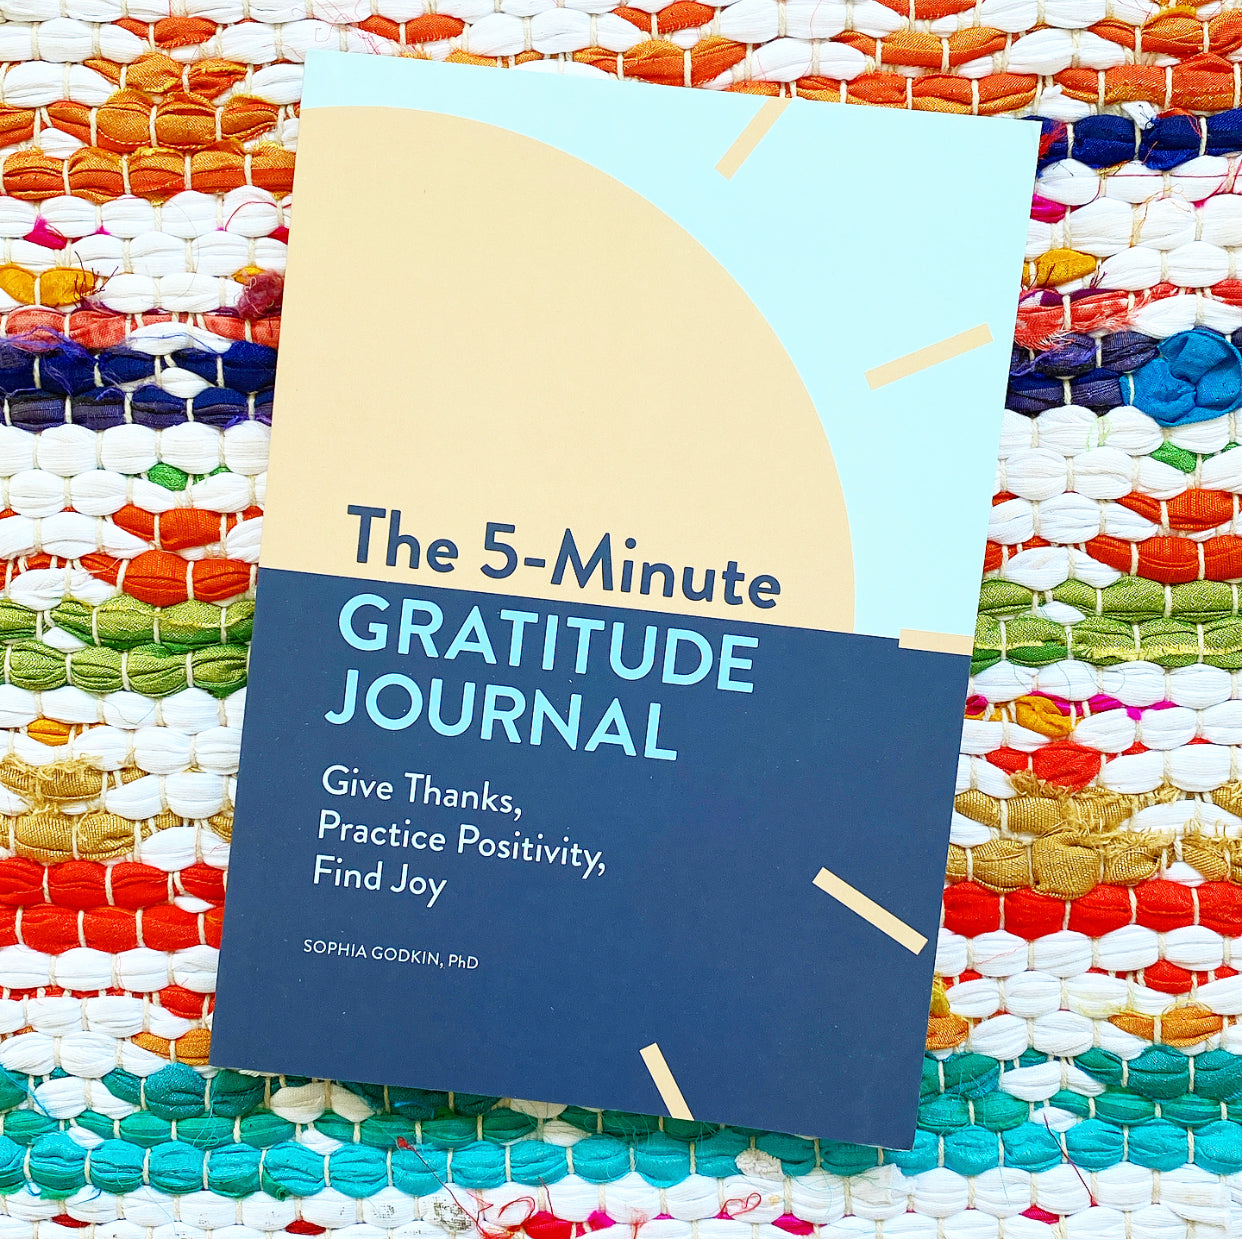 Gratitude Journal 5 minutes a day to develop gratitude mindfulness  productivity 9781080631339